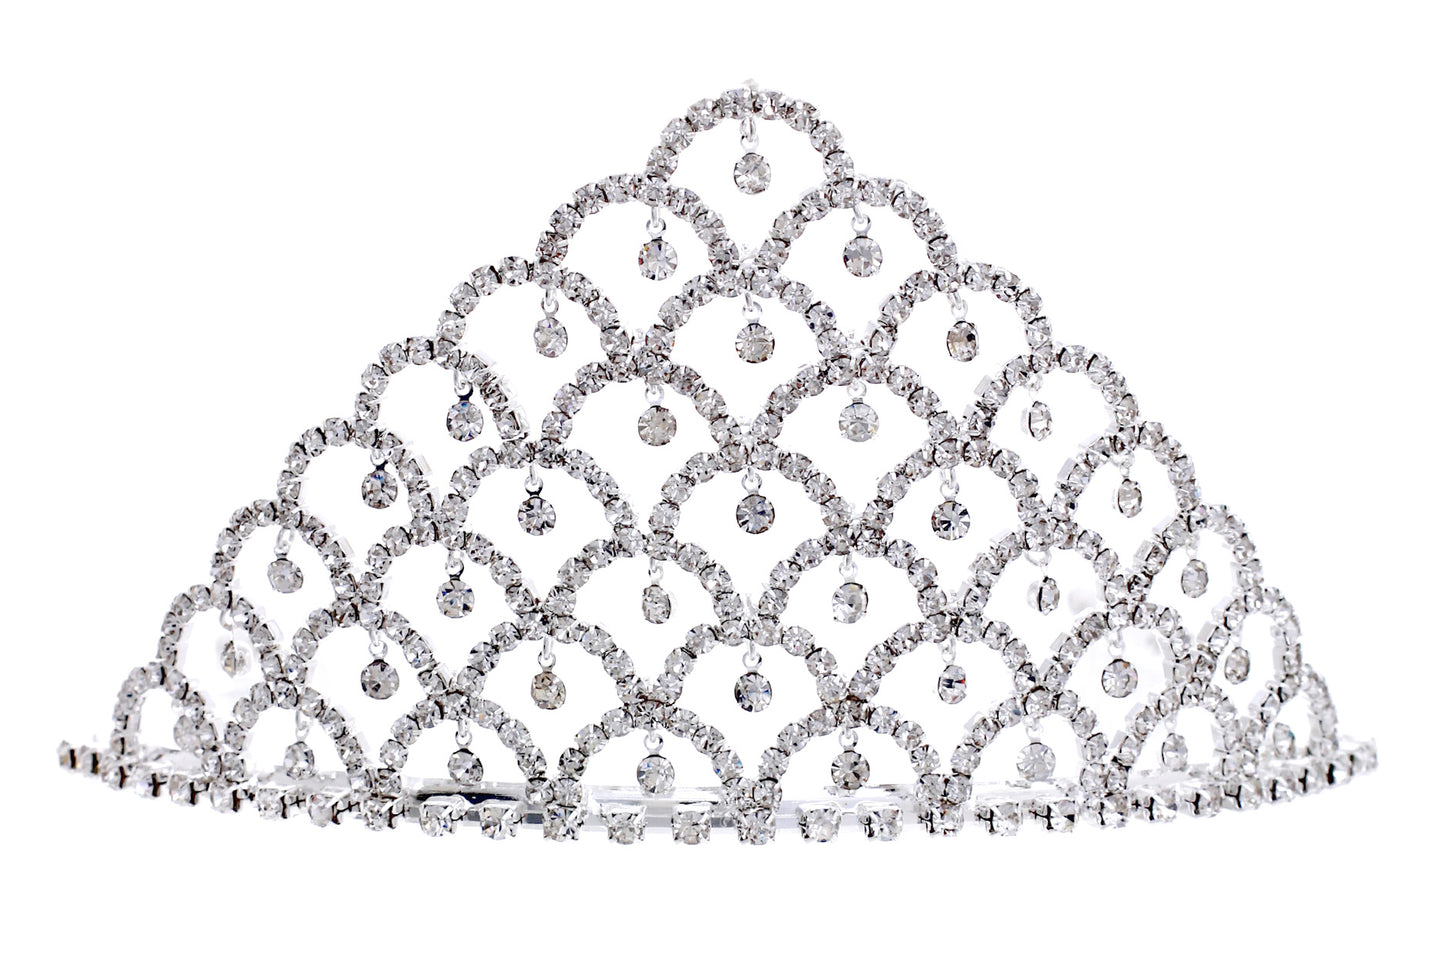 Extravagant crown with dangle charms - Monique Fashion Accessories